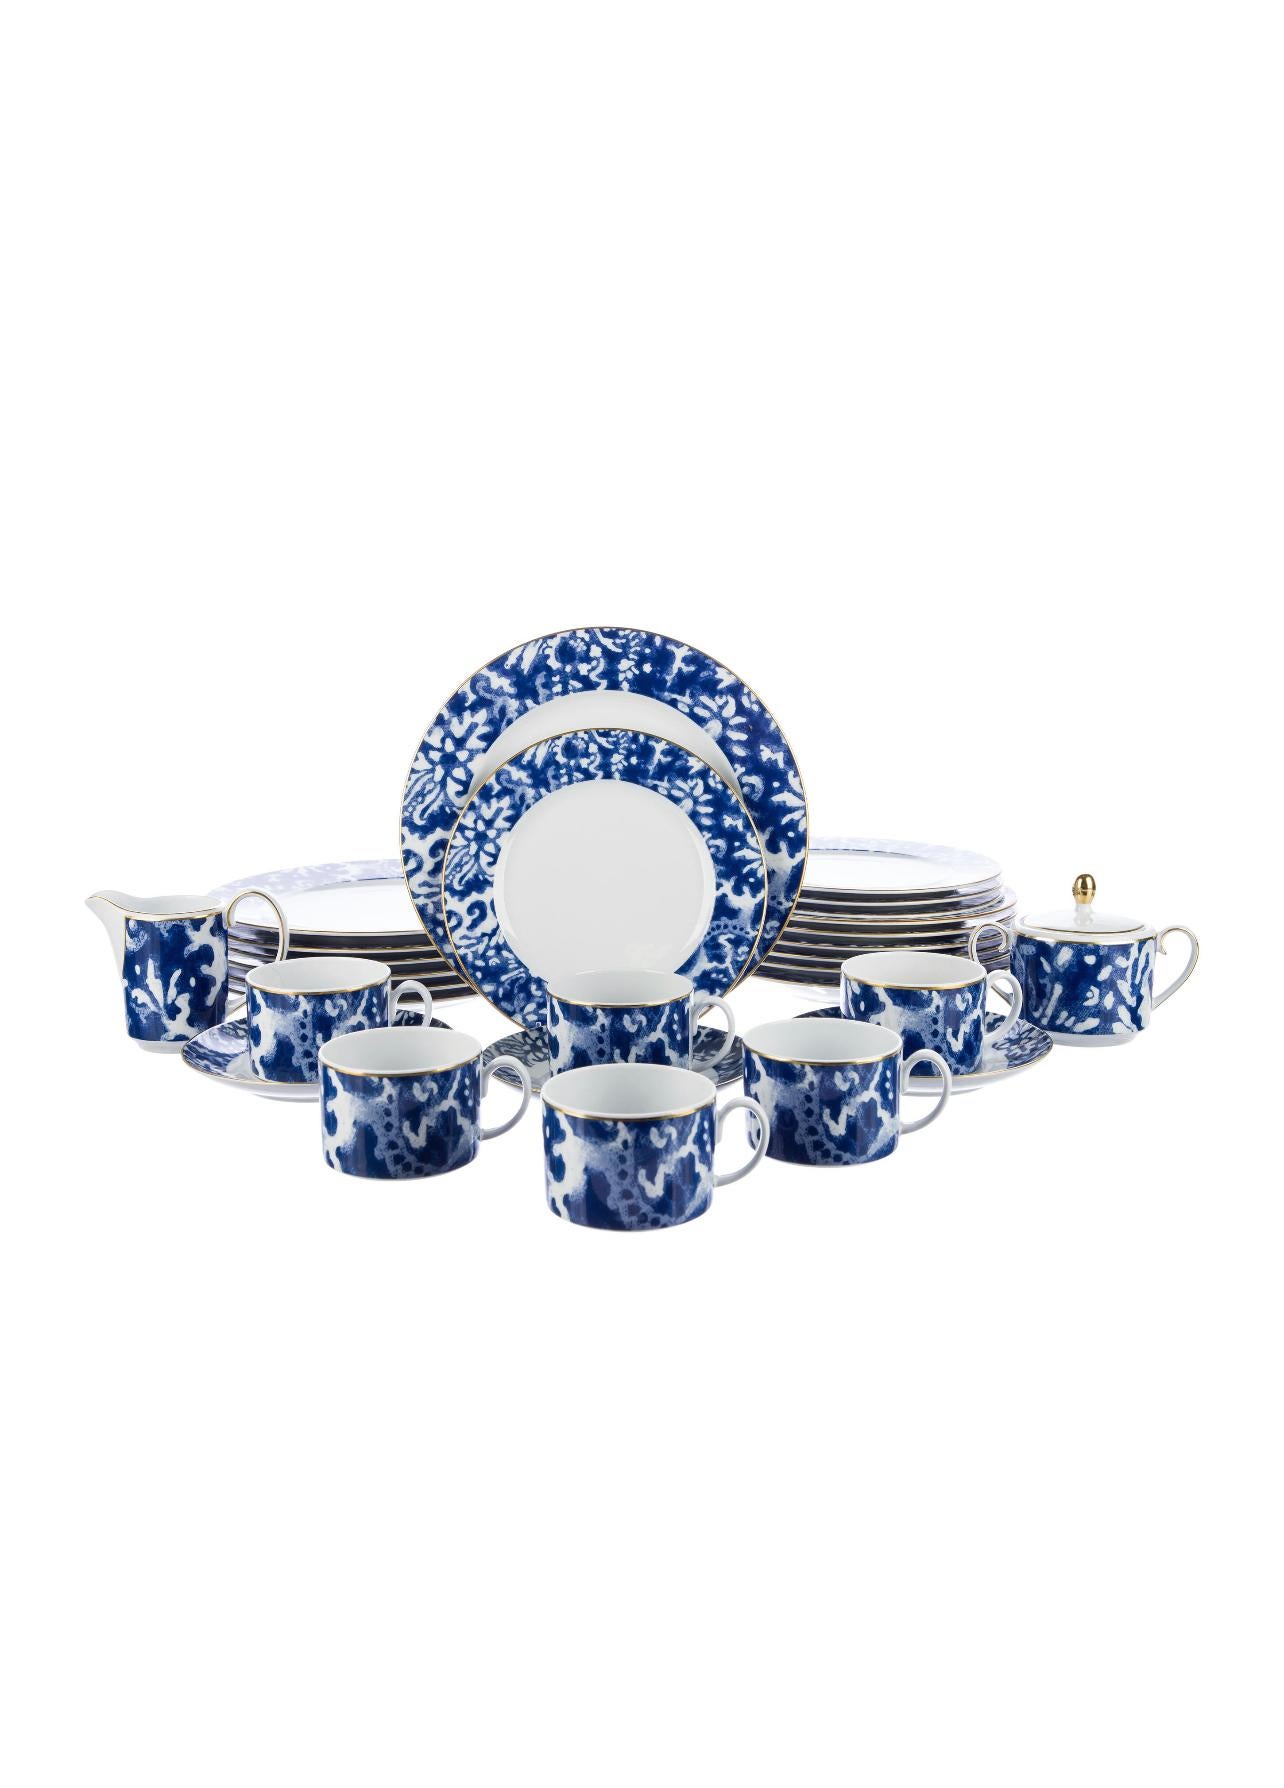 A 16-piece set of dinnerware in the Round Hill pattern by Ralph Lauren Home. Signed, circa 2000.

Features a vibrant tropical pattern in blue and white with gold edge.

Includes the following 16 pieces:
3 dinner plates
4 bread plates
2 rim soup